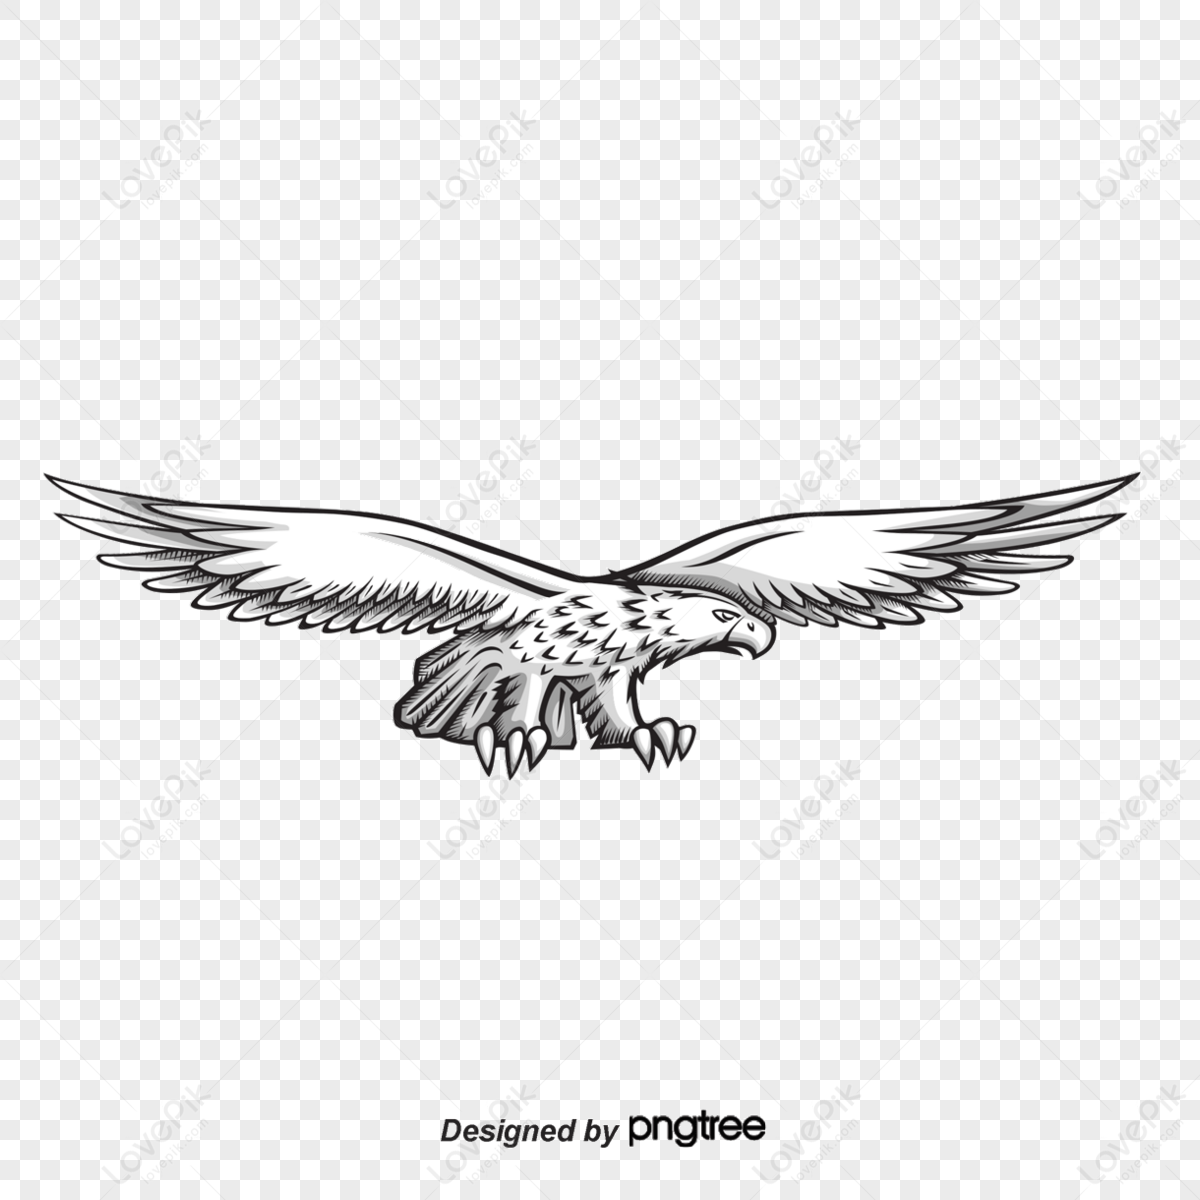 Golden Eagle Flying Swoop Hand Draw Vector. Stock Vector - Illustration of  wings, drawing: 78022776 | Golden eagle flying, Golden eagle, Eagle pictures